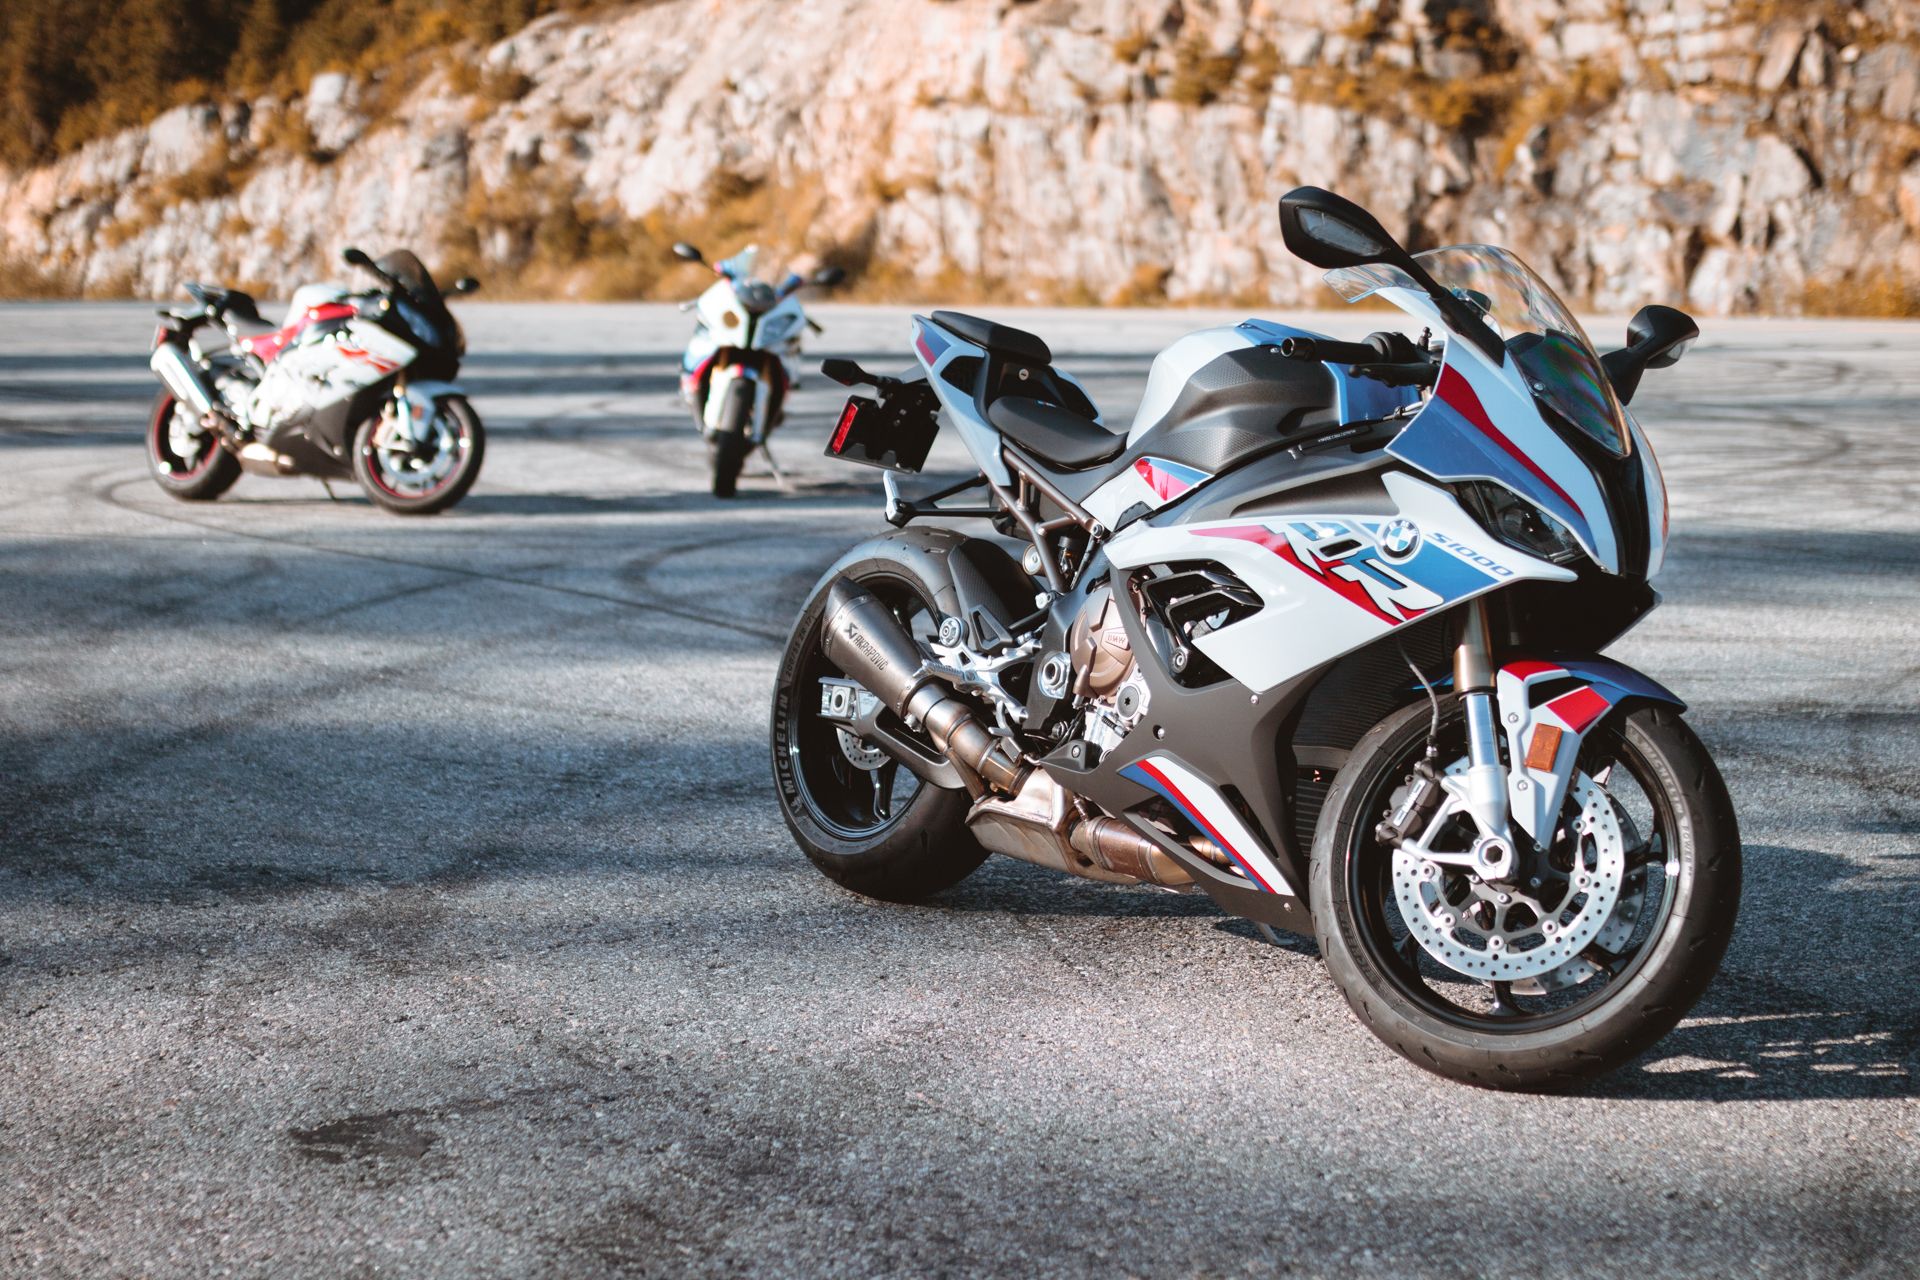 Bmw 1000 Rr 2020 / 2020 BMW S 1000 RR Review Cycle News Motorcycle